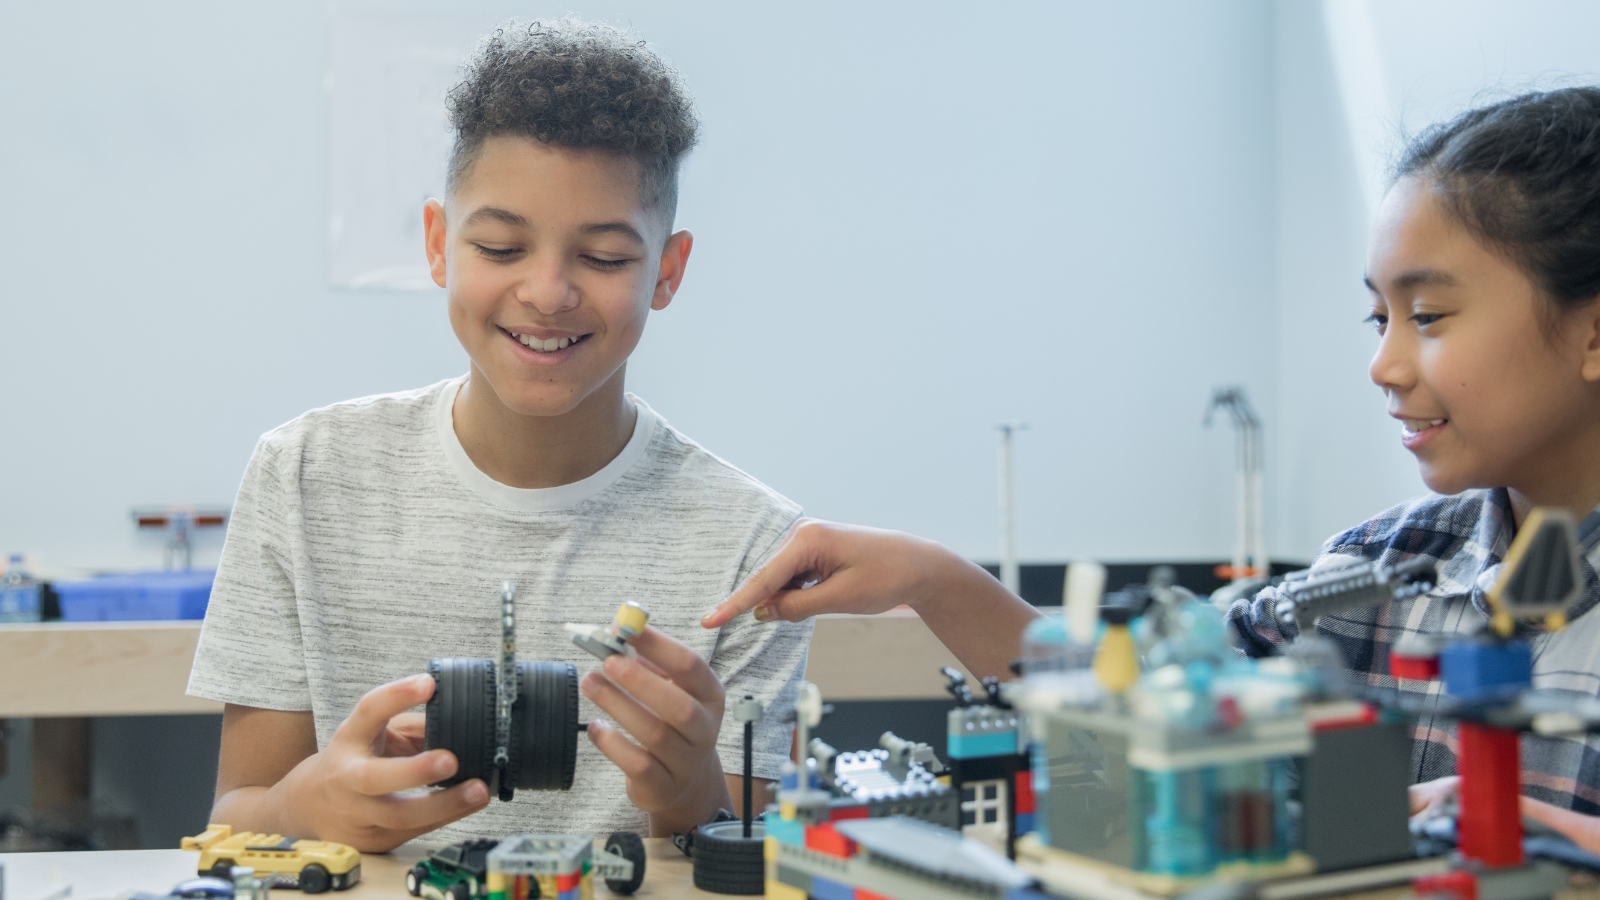 Students engaging in career-connected STEM learning through project-based learning